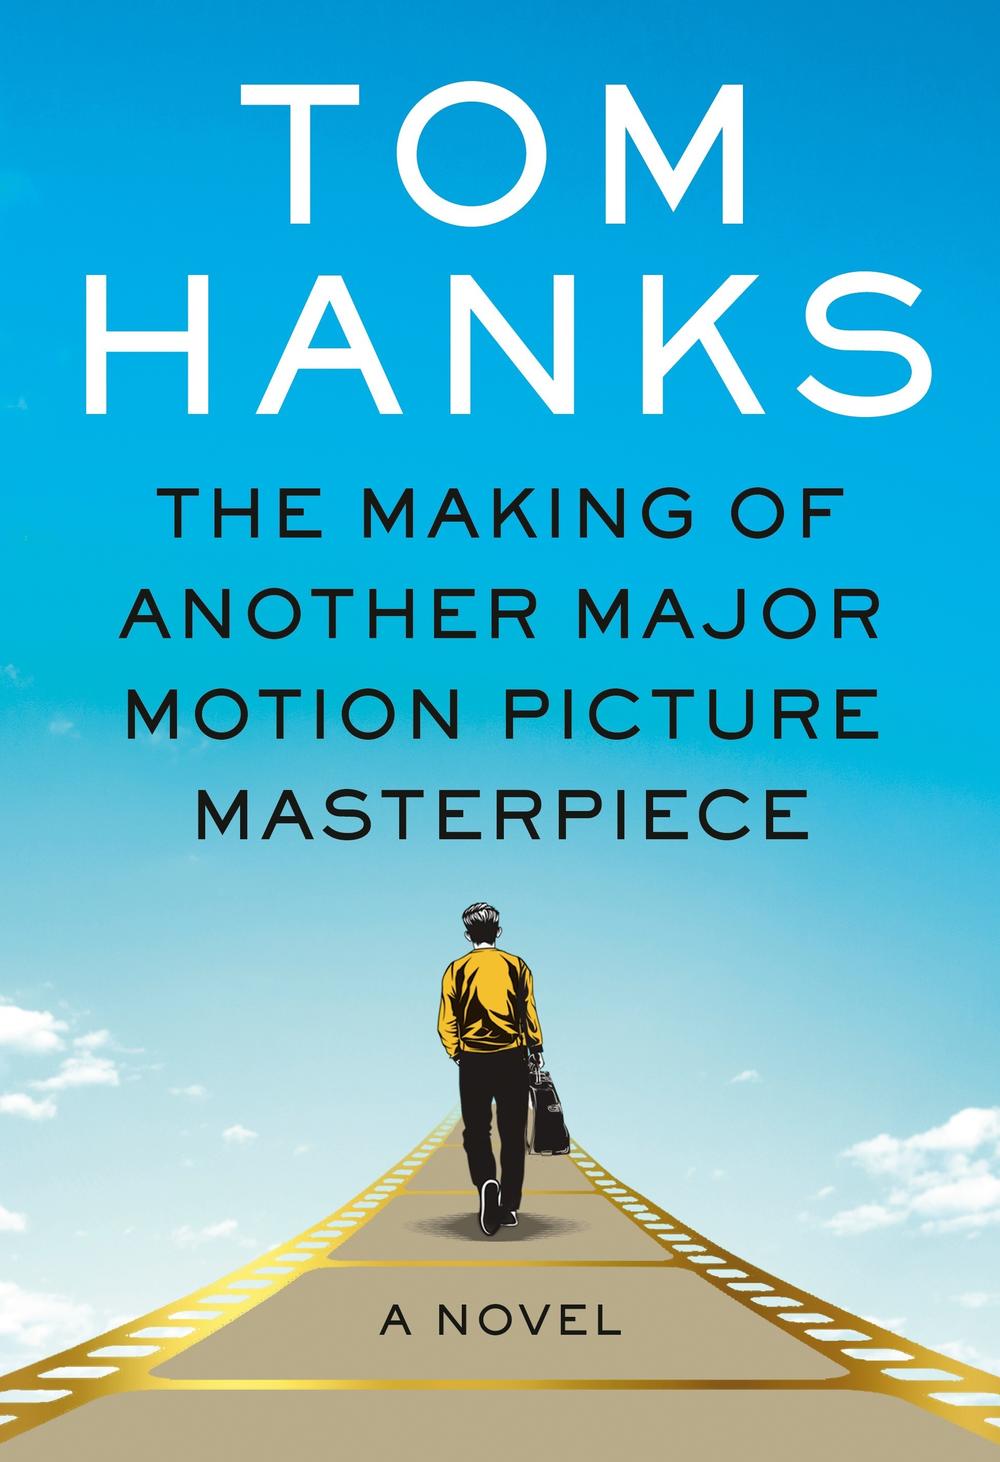 Tom Hanks has written a first novel, drawing on his decades in the movie industry.